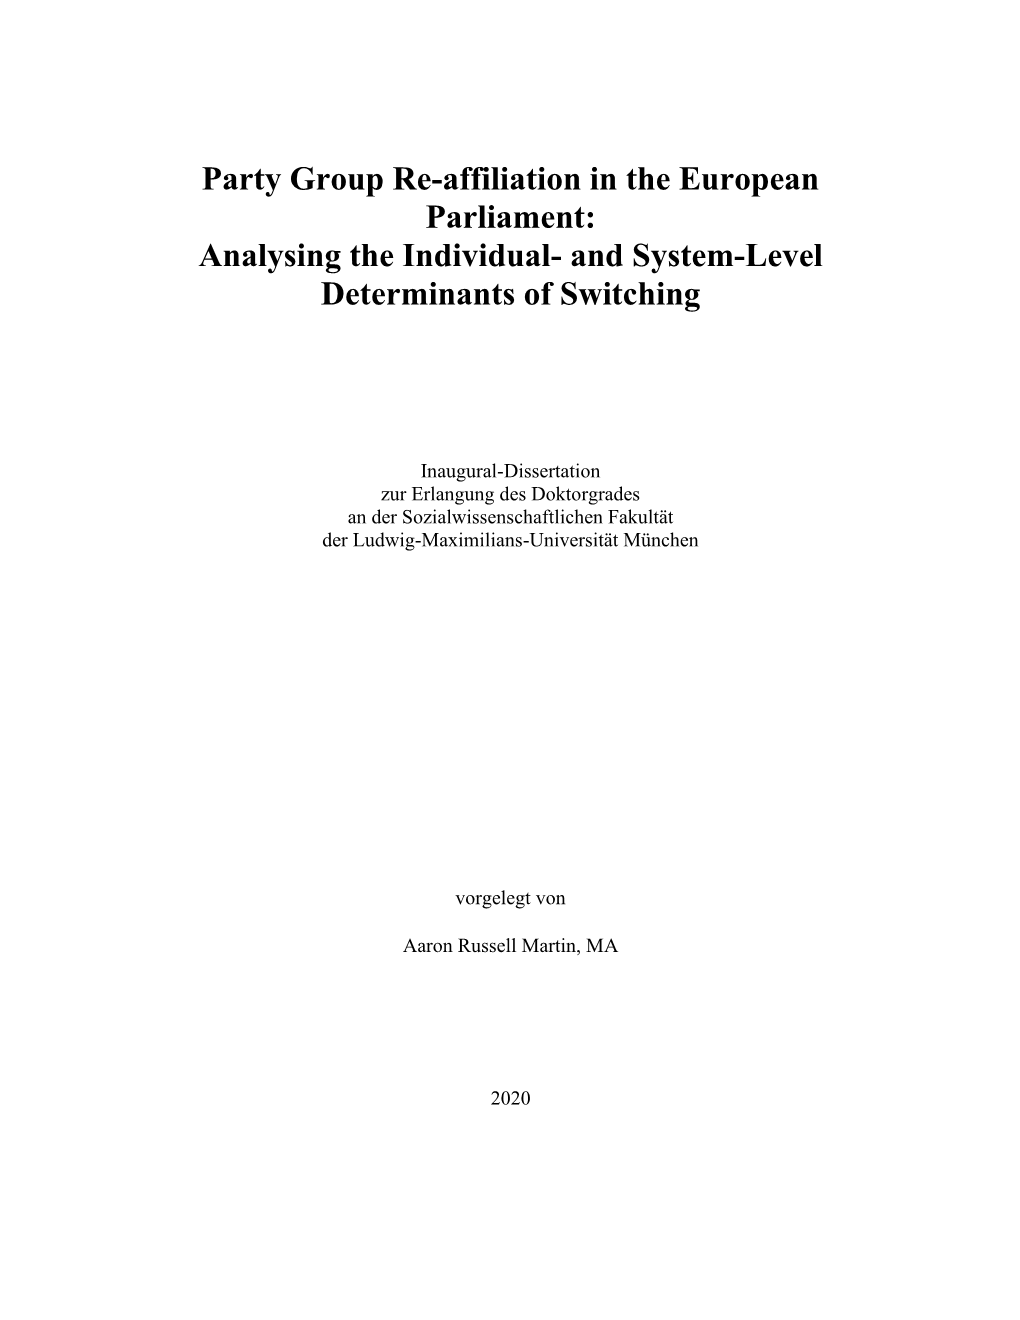 Party Group Re-Affiliation in the European Parliament: Analysing the Individual- and System-Level Determinants of Switching